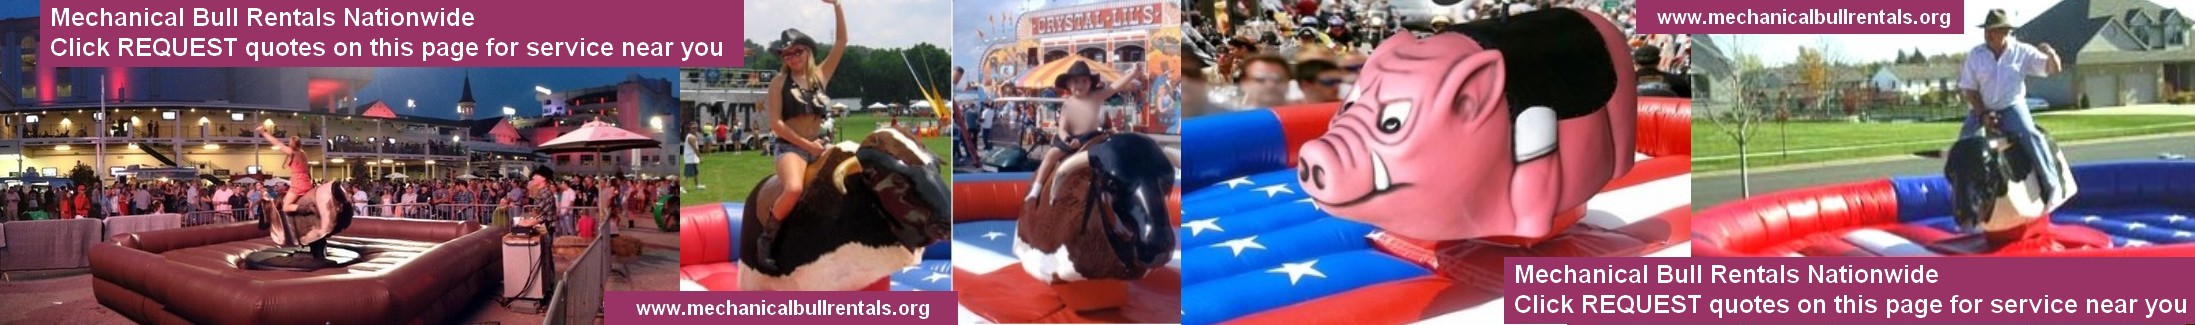 Mechanical Bull Rentals Trenton New Jersey NJ and near you. Free referrals to local mechanical bull companies LOGO